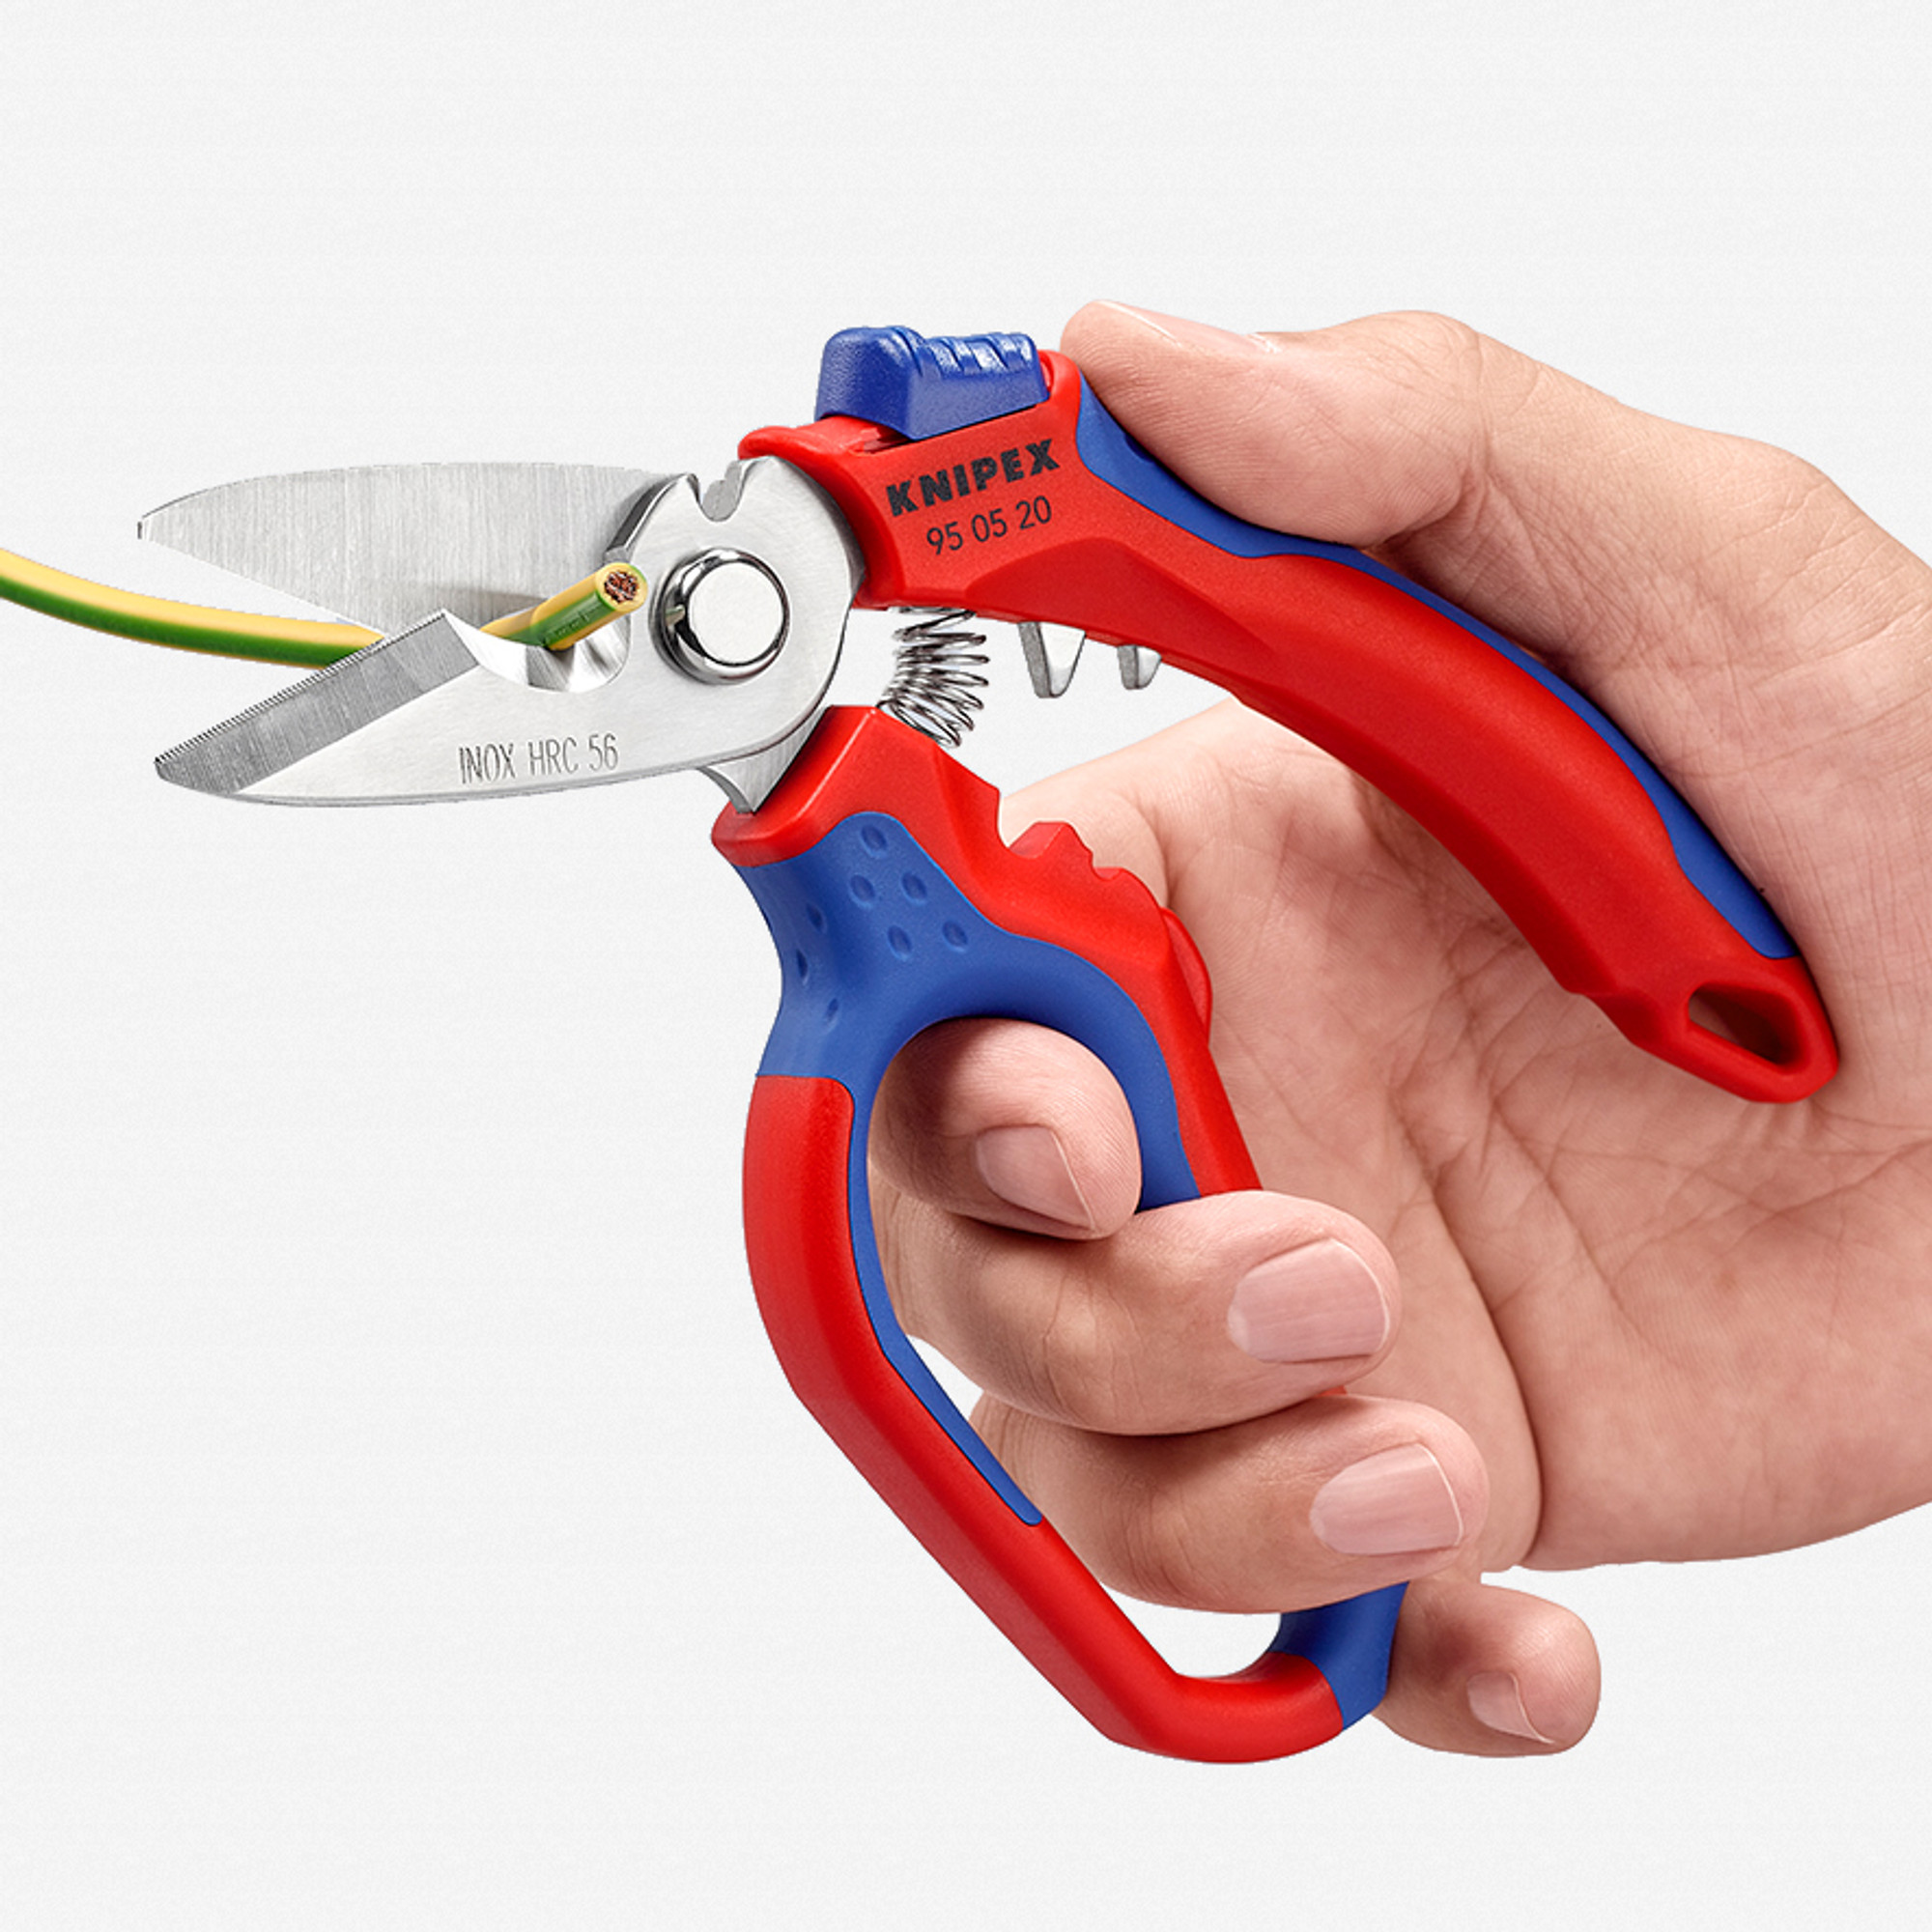 Knipex Electricians Shears / Scissors ✂️ - The NEW tool bag